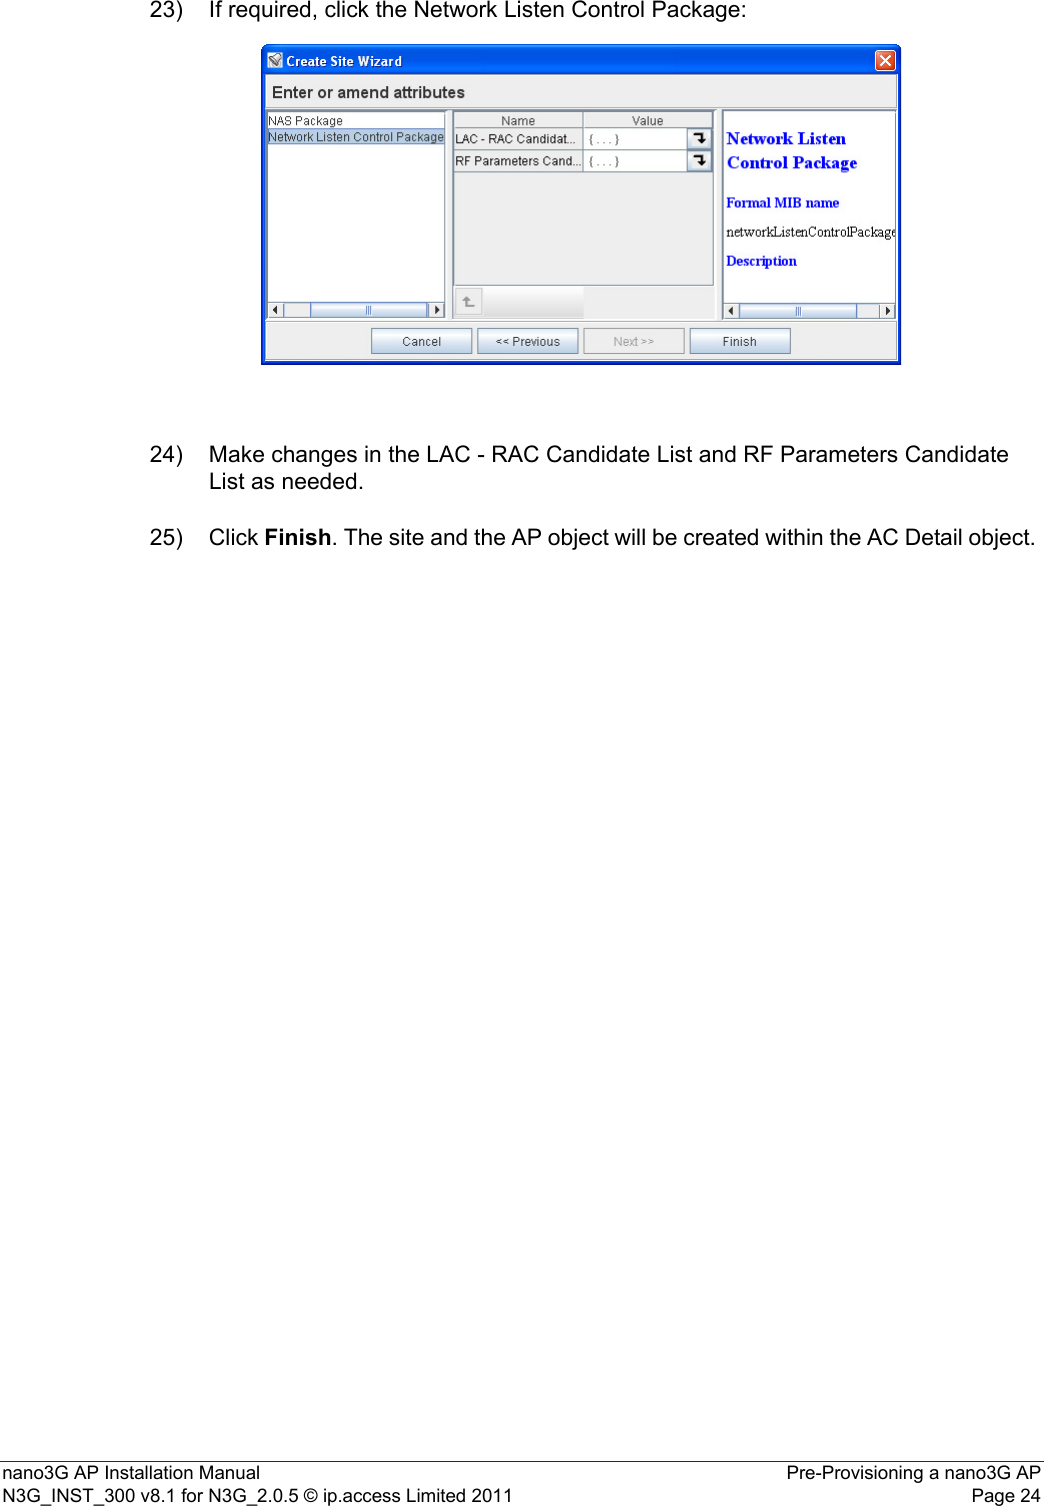 nano3G AP Installation Manual Pre-Provisioning a nano3G APN3G_INST_300 v8.1 for N3G_2.0.5 © ip.access Limited 2011 Page 2423) If required, click the Network Listen Control Package:24) Make changes in the LAC - RAC Candidate List and RF Parameters Candidate List as needed.25) Click Finish. The site and the AP object will be created within the AC Detail object. 